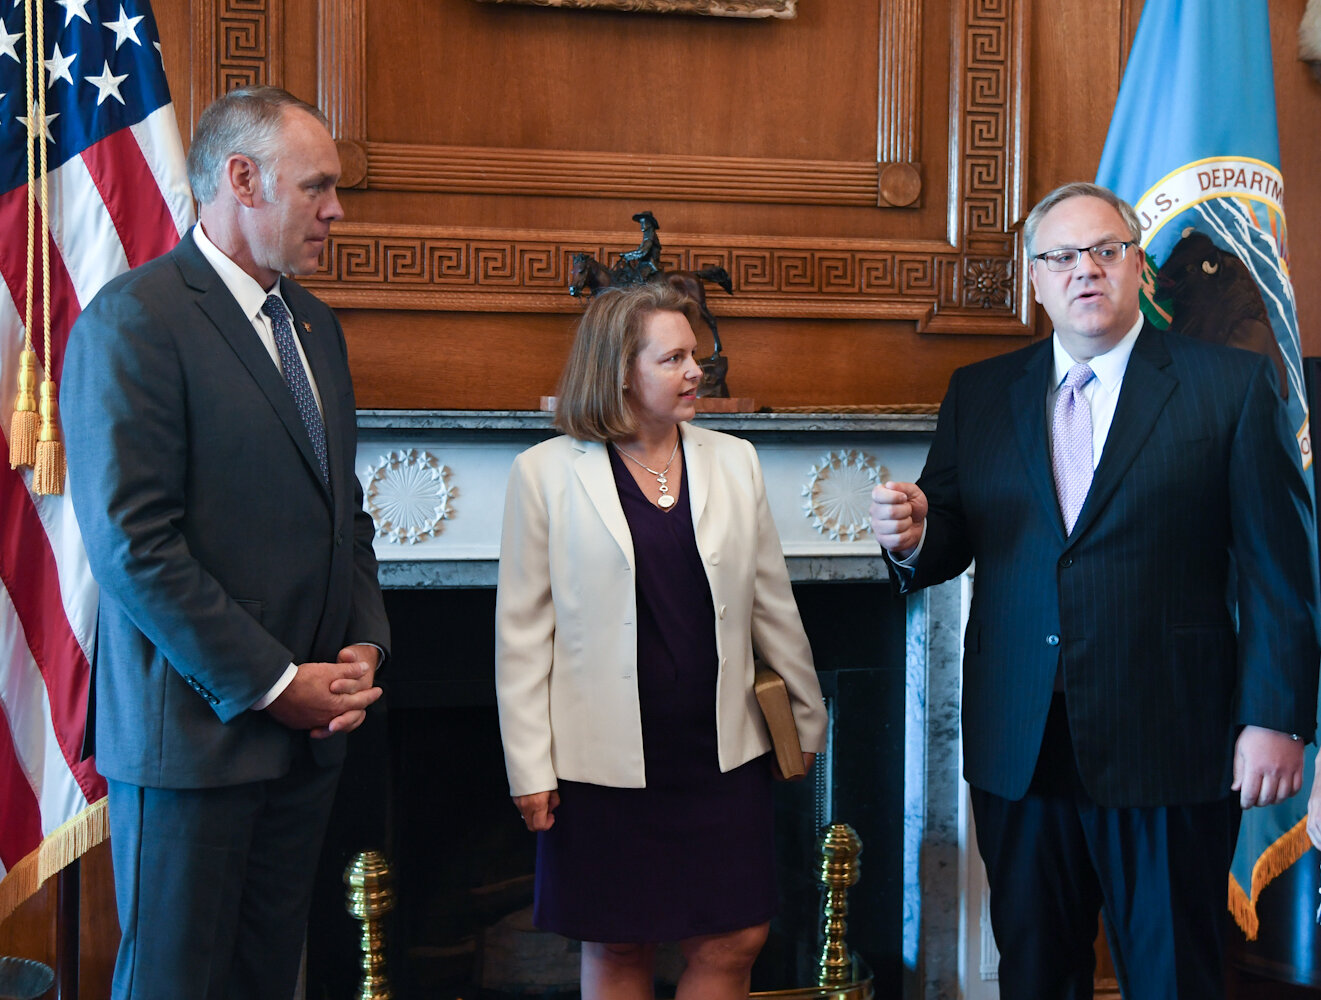 PICTURED: Former Interior Secretary Ryan Zinke (left) stands with newly-sworn in Deputy Sec., and now current Interior Secretary David Bernhardt (right).